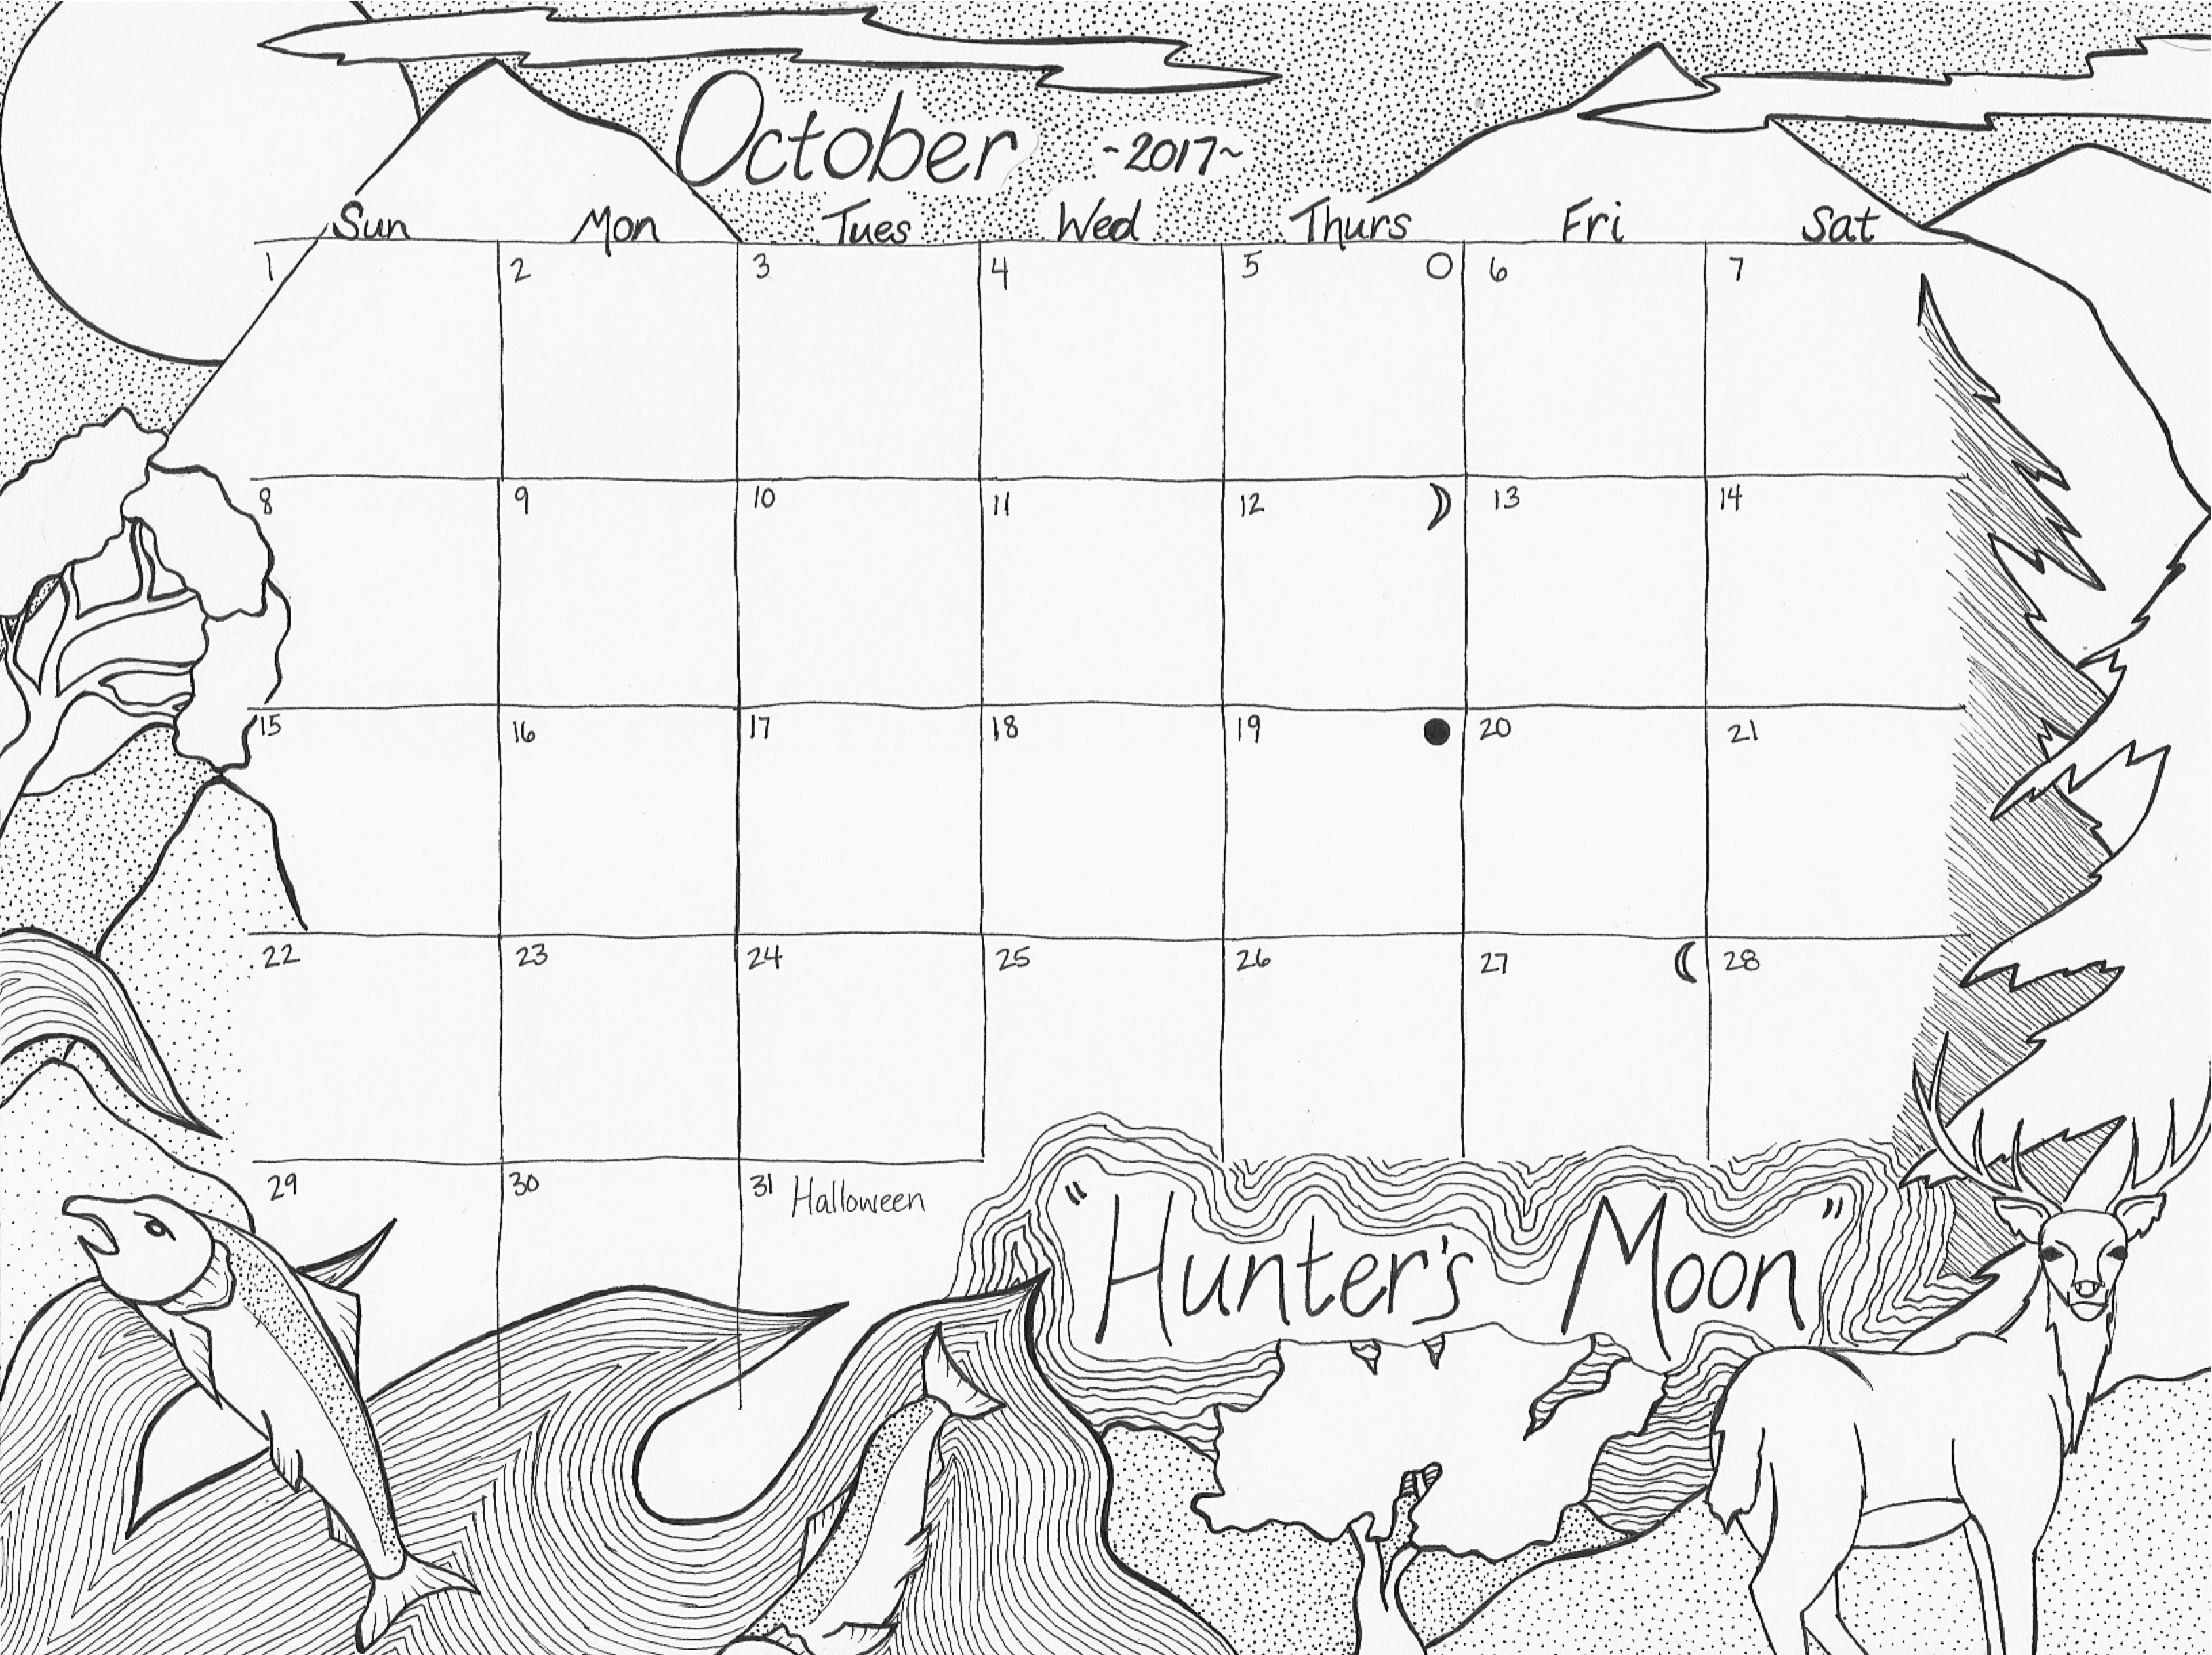 Calendar Coloring Pages at Free printable colorings